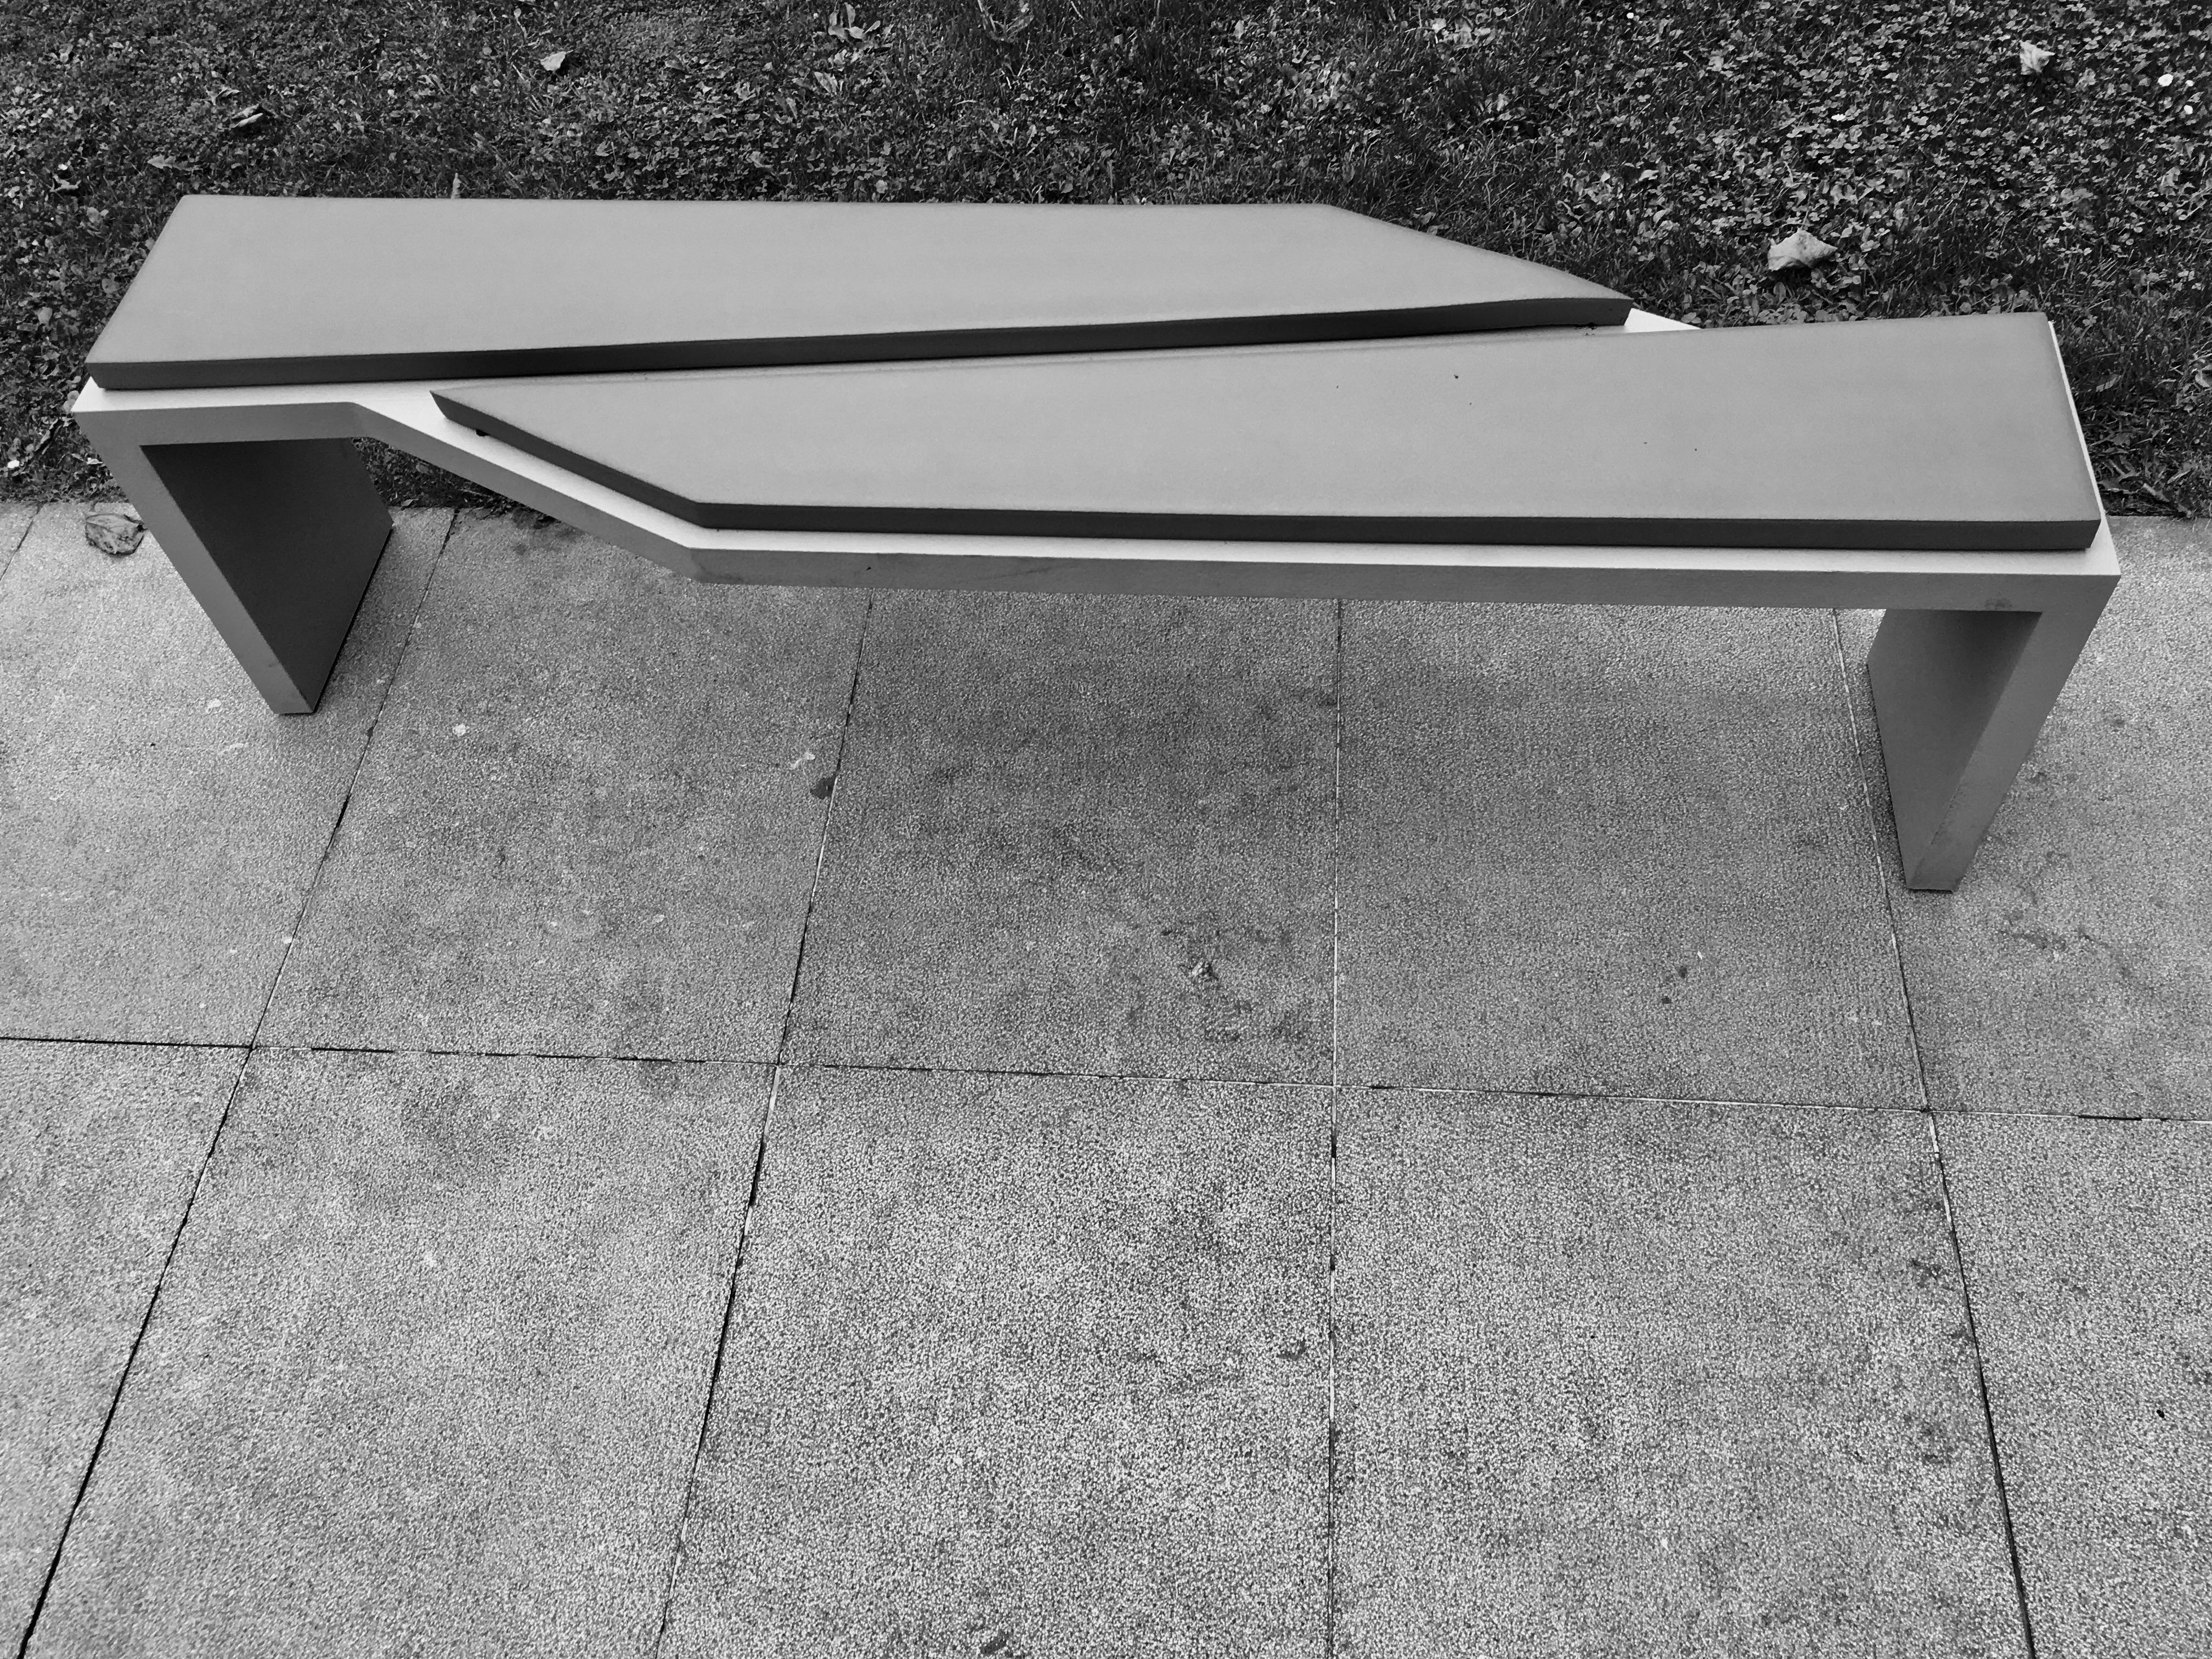 Sculptural Geometric Prototype Bench Attributed to  Arne Quinze, Belgium 2000 In Good Condition For Sale In Brussels, BE